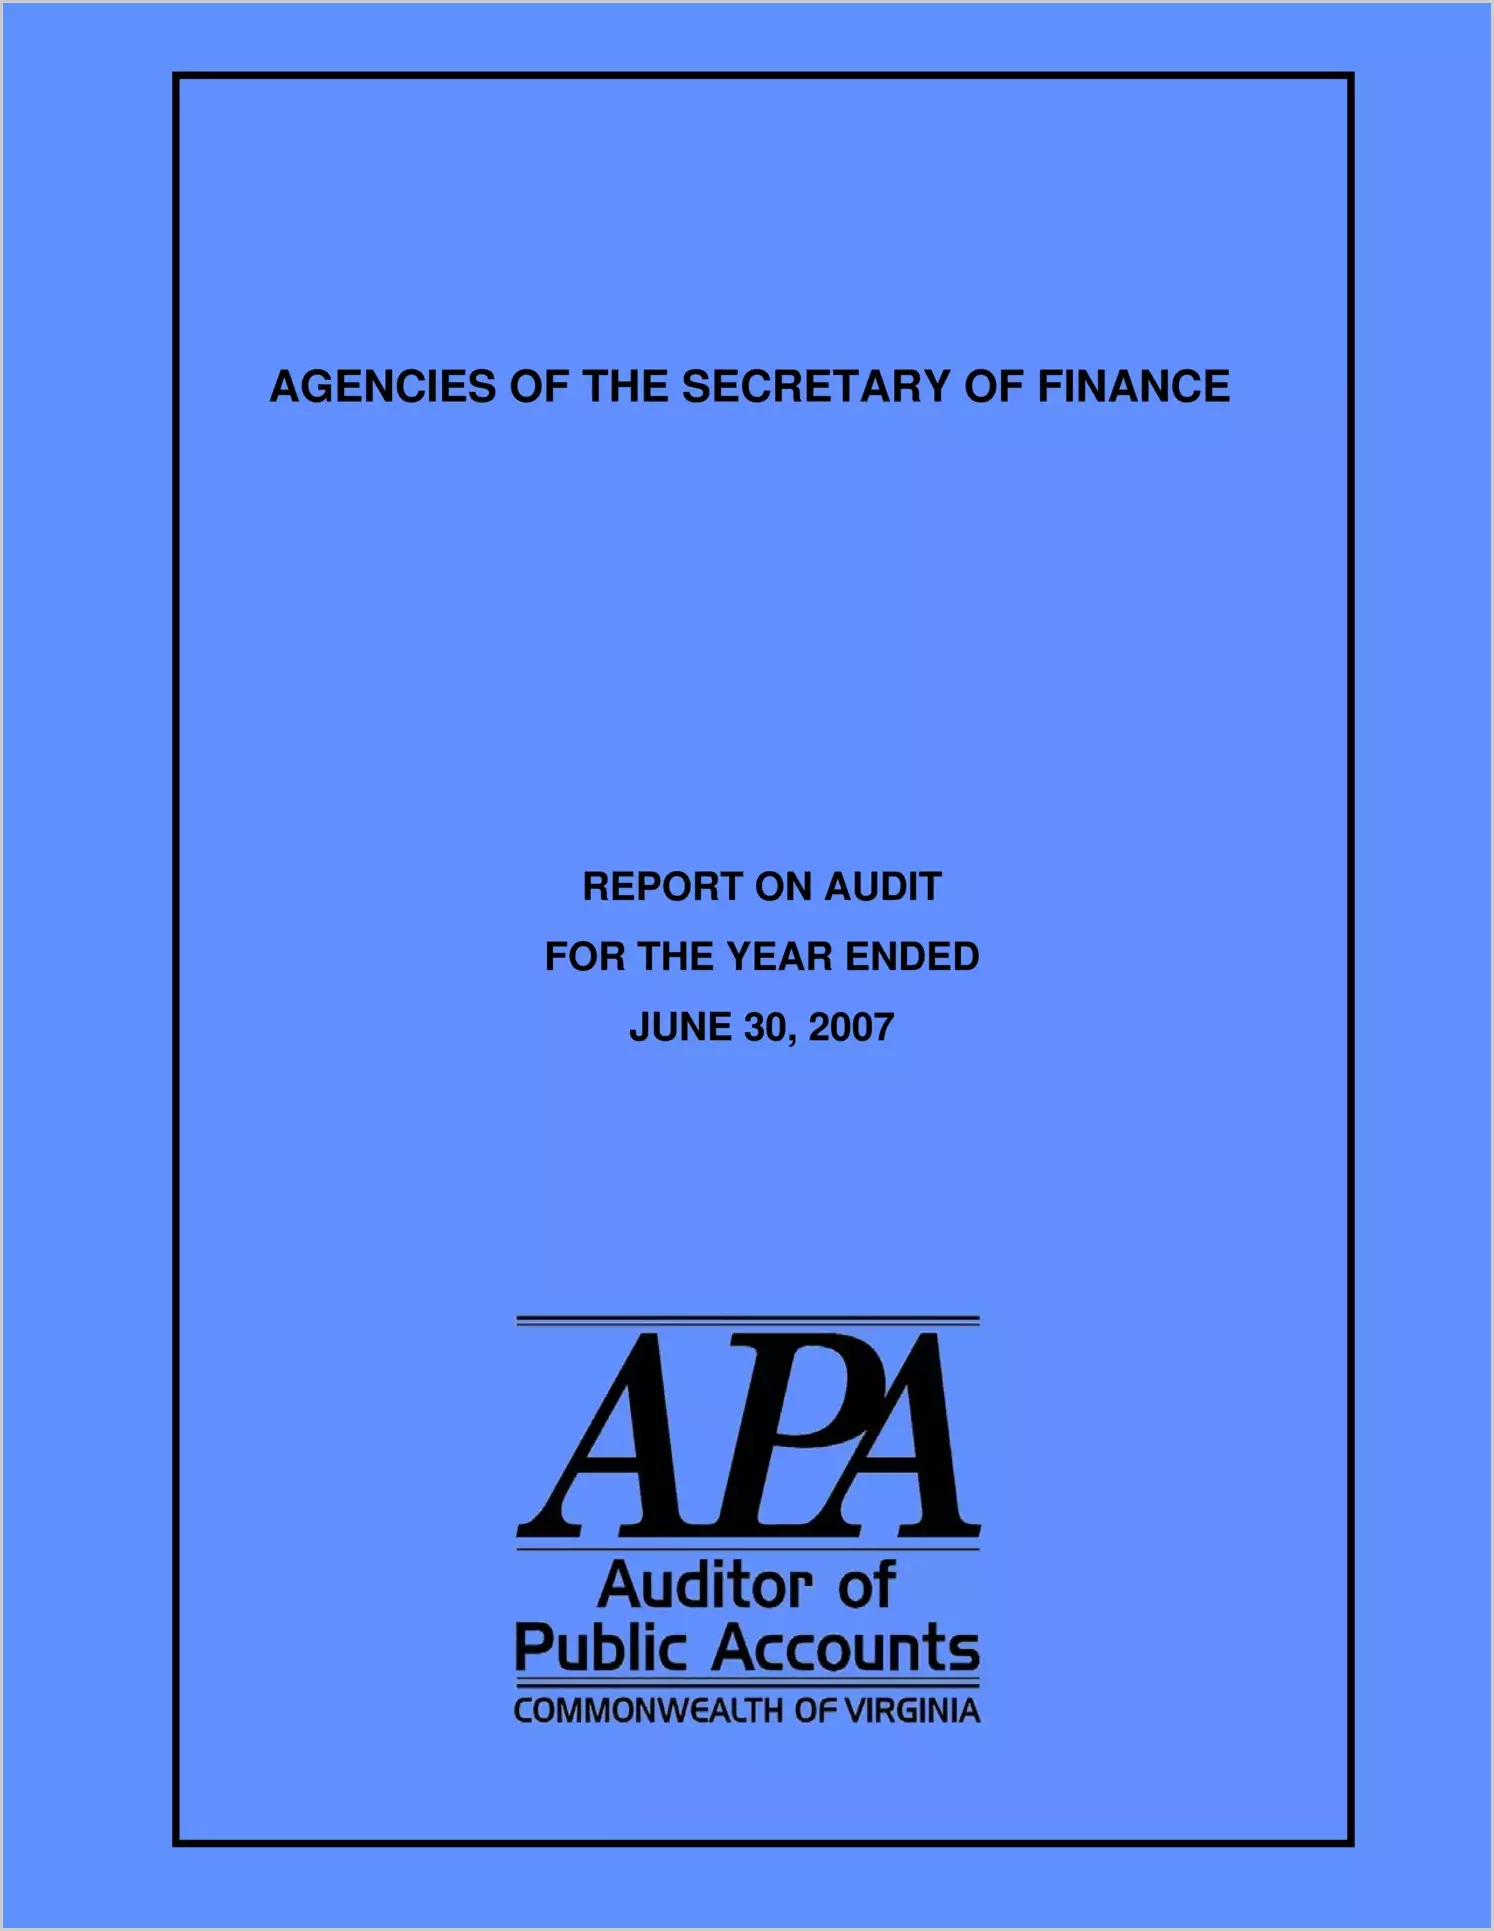 Agencies of the Secretary of Finance report on audit for the year ended June 30, 2007